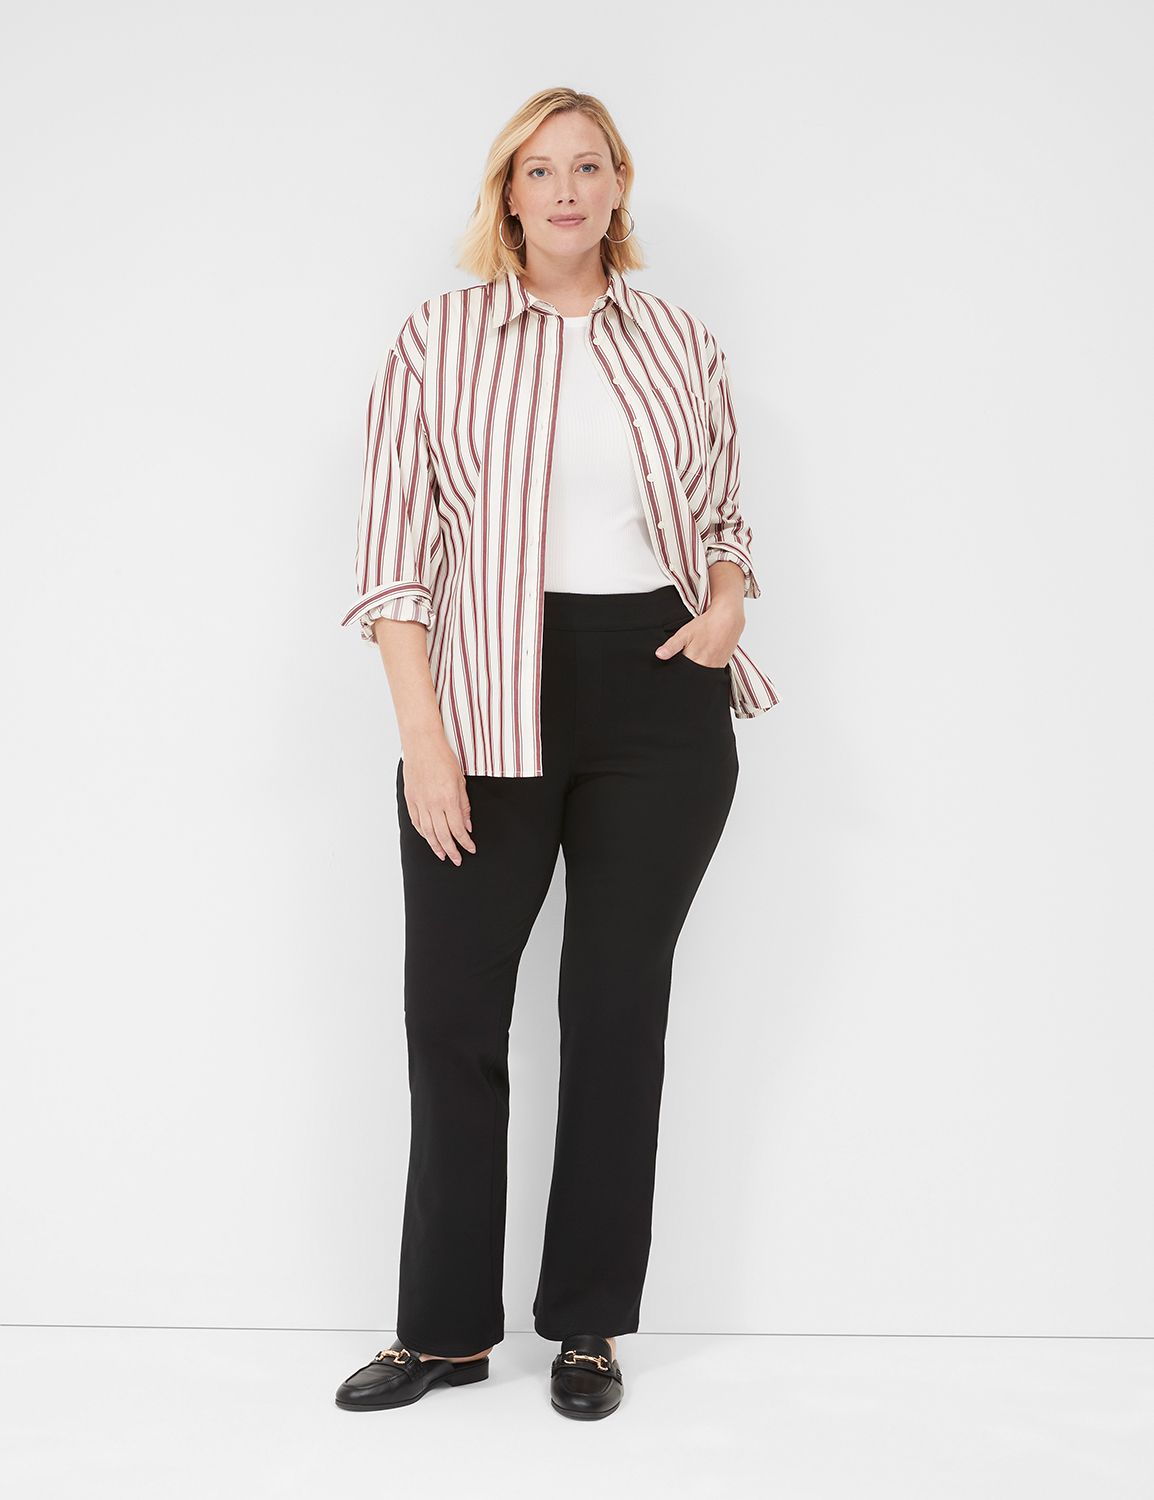 Warehouse One Women's 4 Pocket Pull-on Ponte Pant